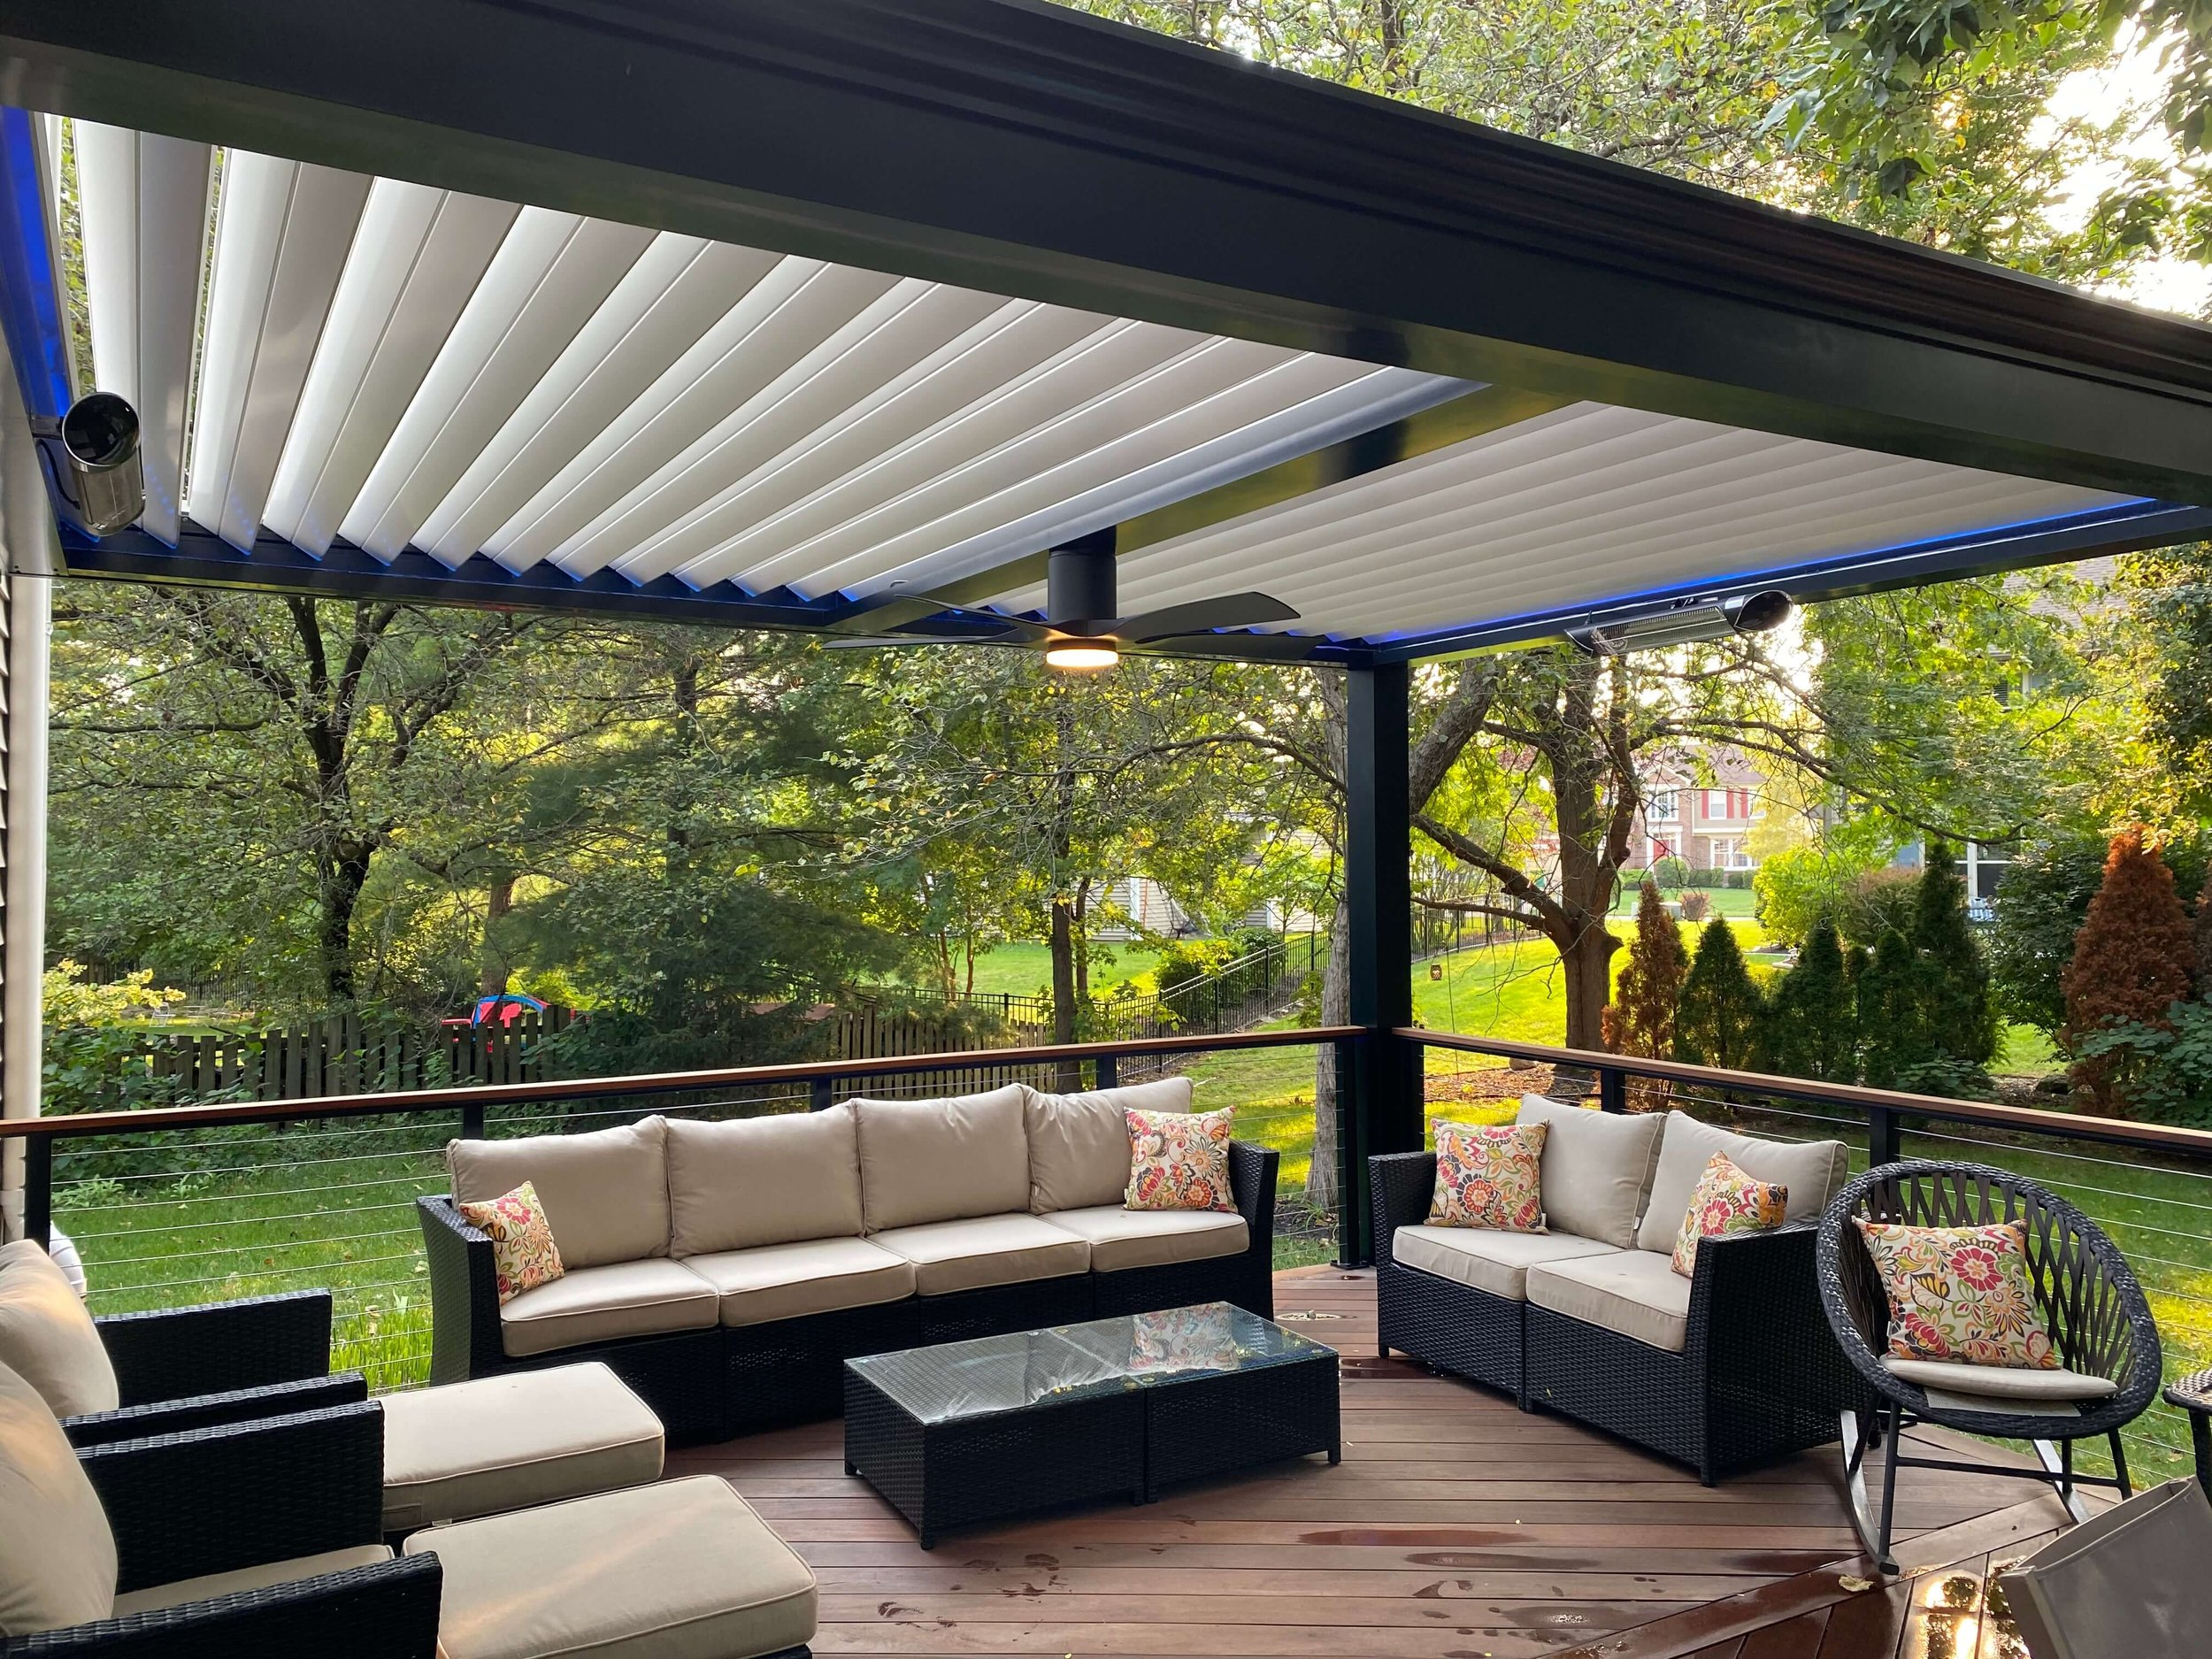 Aluminum Pergola Can Withstand Heavy Winds With Durable Material